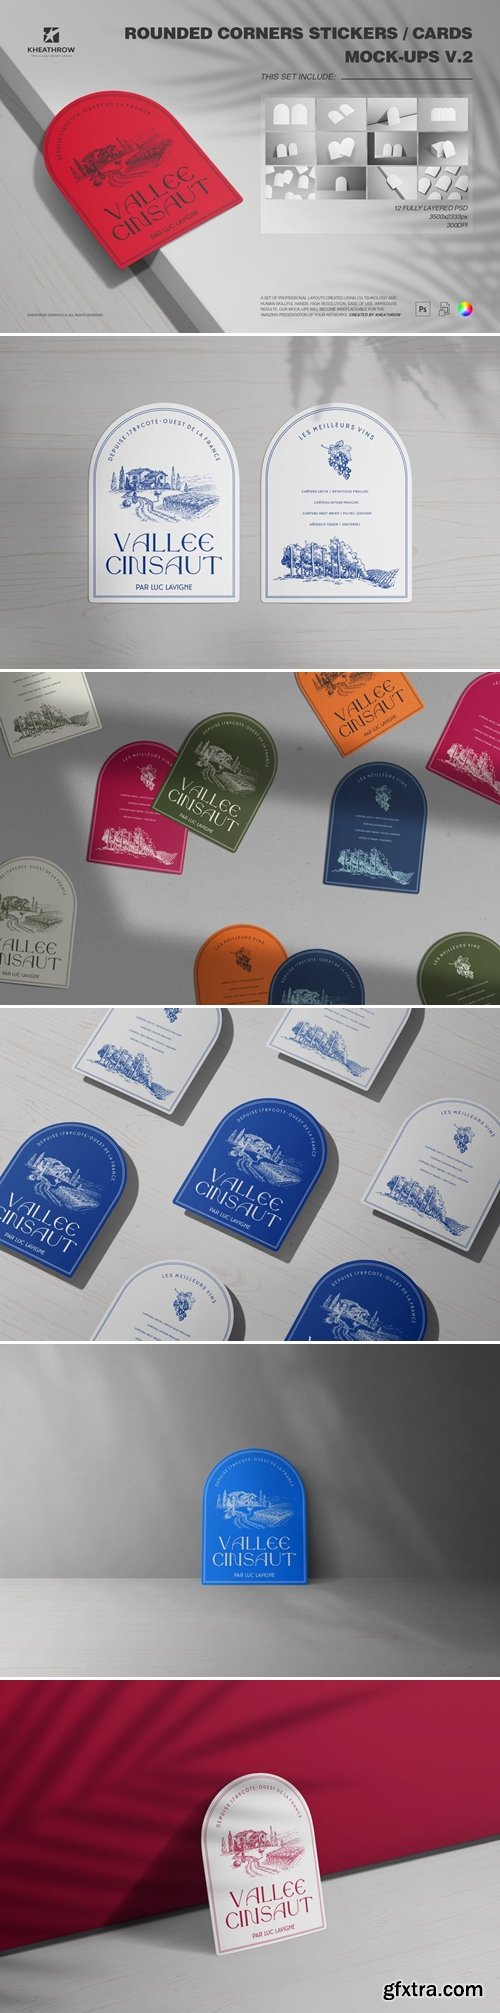 Rounded Corners Stickers / Cards Mock-Ups Vol.2